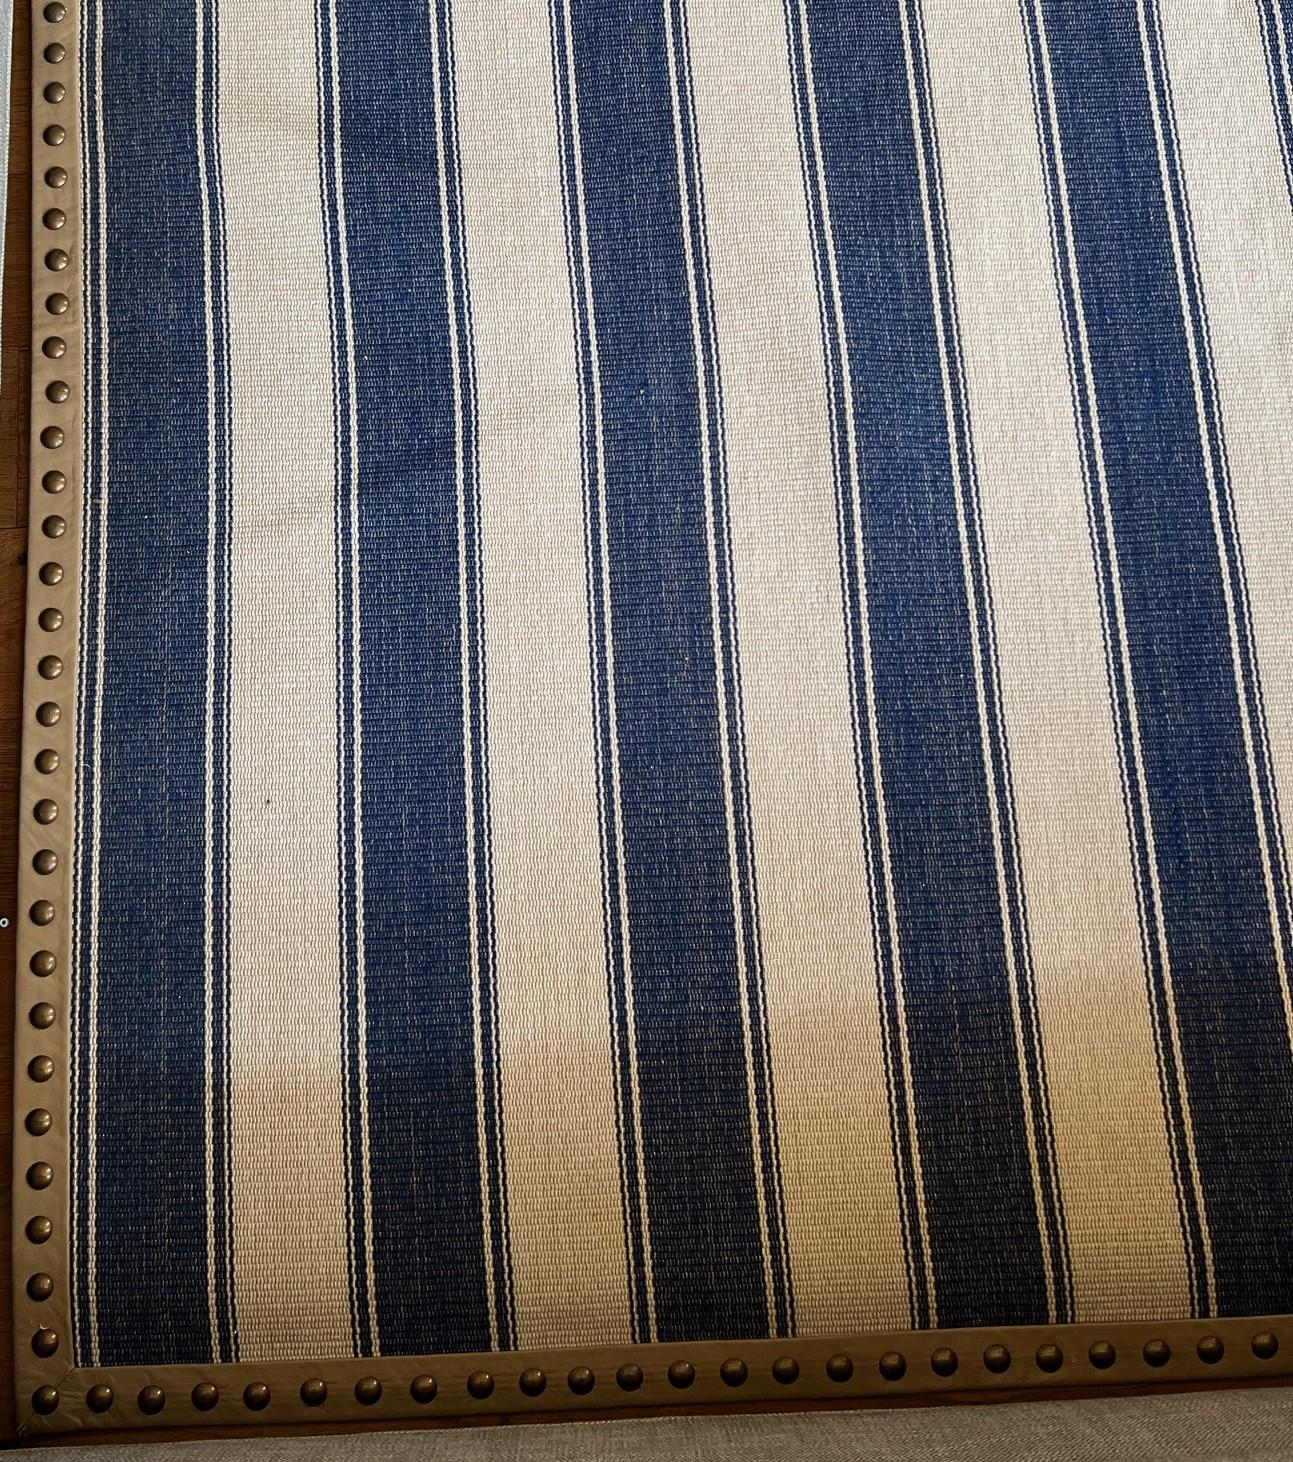 Custom Blue and Beige Striped Kilim Edged With Faux Leather and Brass Trim In Good Condition For Sale In Morristown, NJ